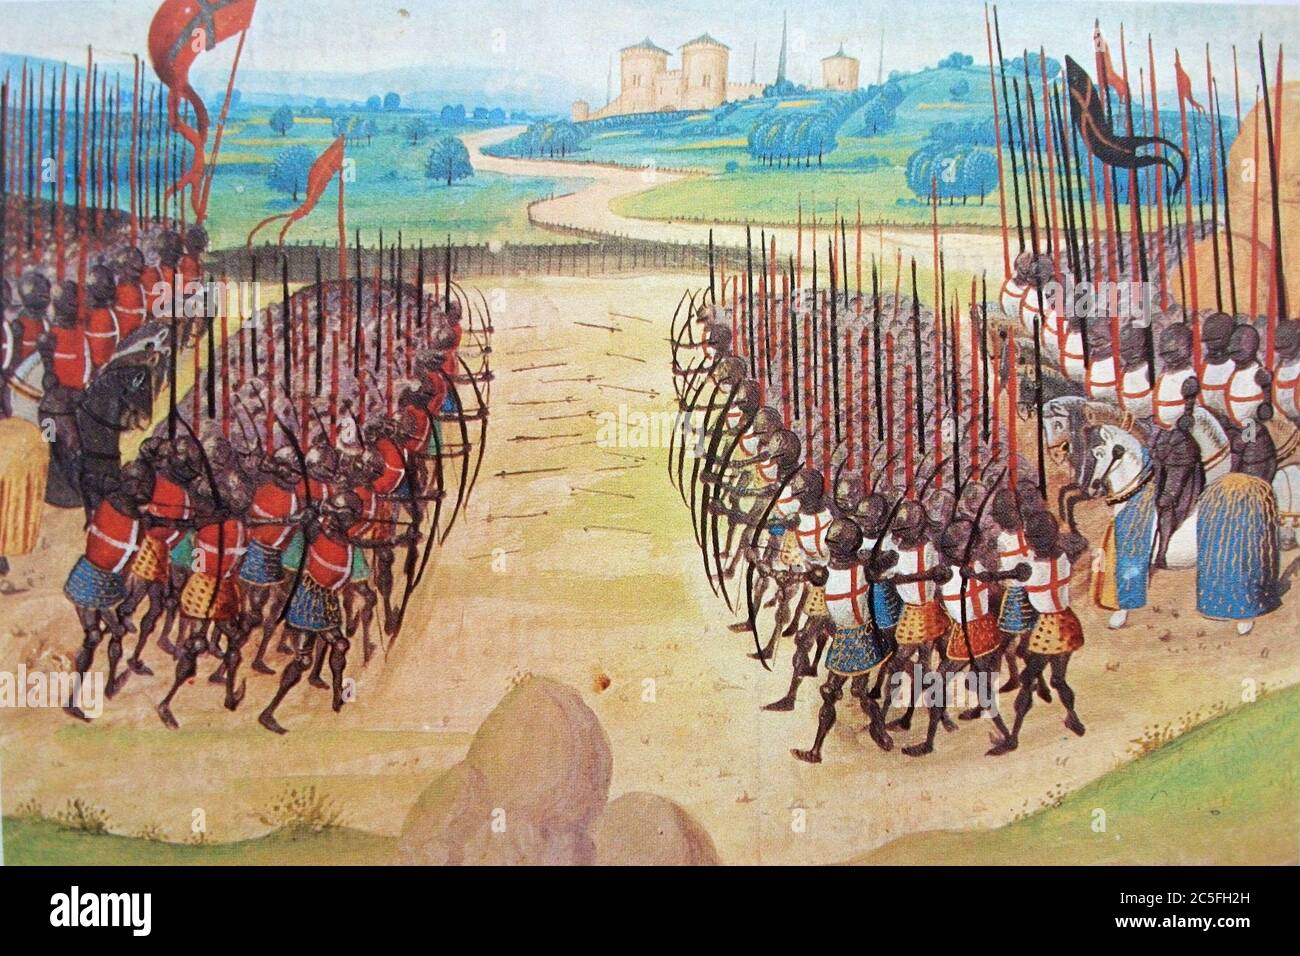 The Battle of Agincourt, one of the English victories in the Hundred Years' War. It took place on 25 October 1415 near Azincourt, in Northern France. The Battle of Agincourt, 15th-century miniature by Enguerrand de Monstrelet Stock Photo